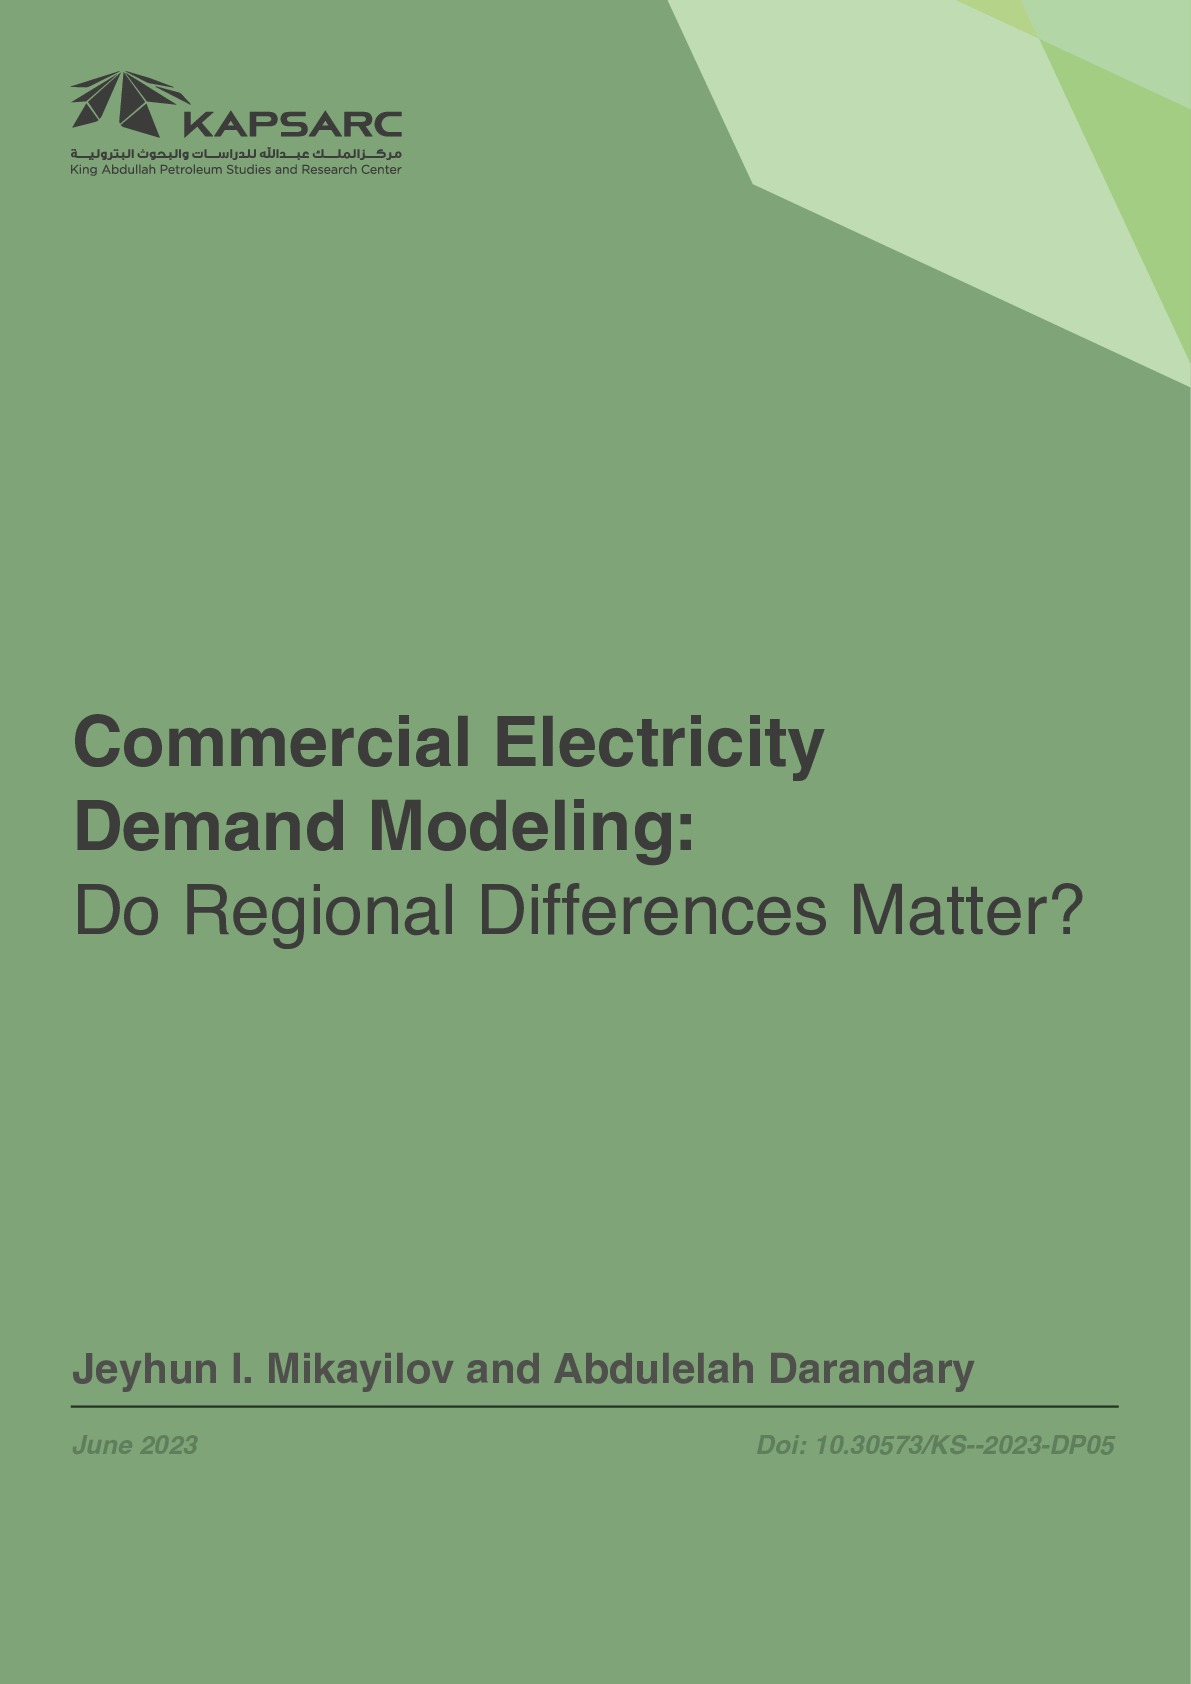 Commercial Electricity Demand Modeling: Do Regional Differences Matter?